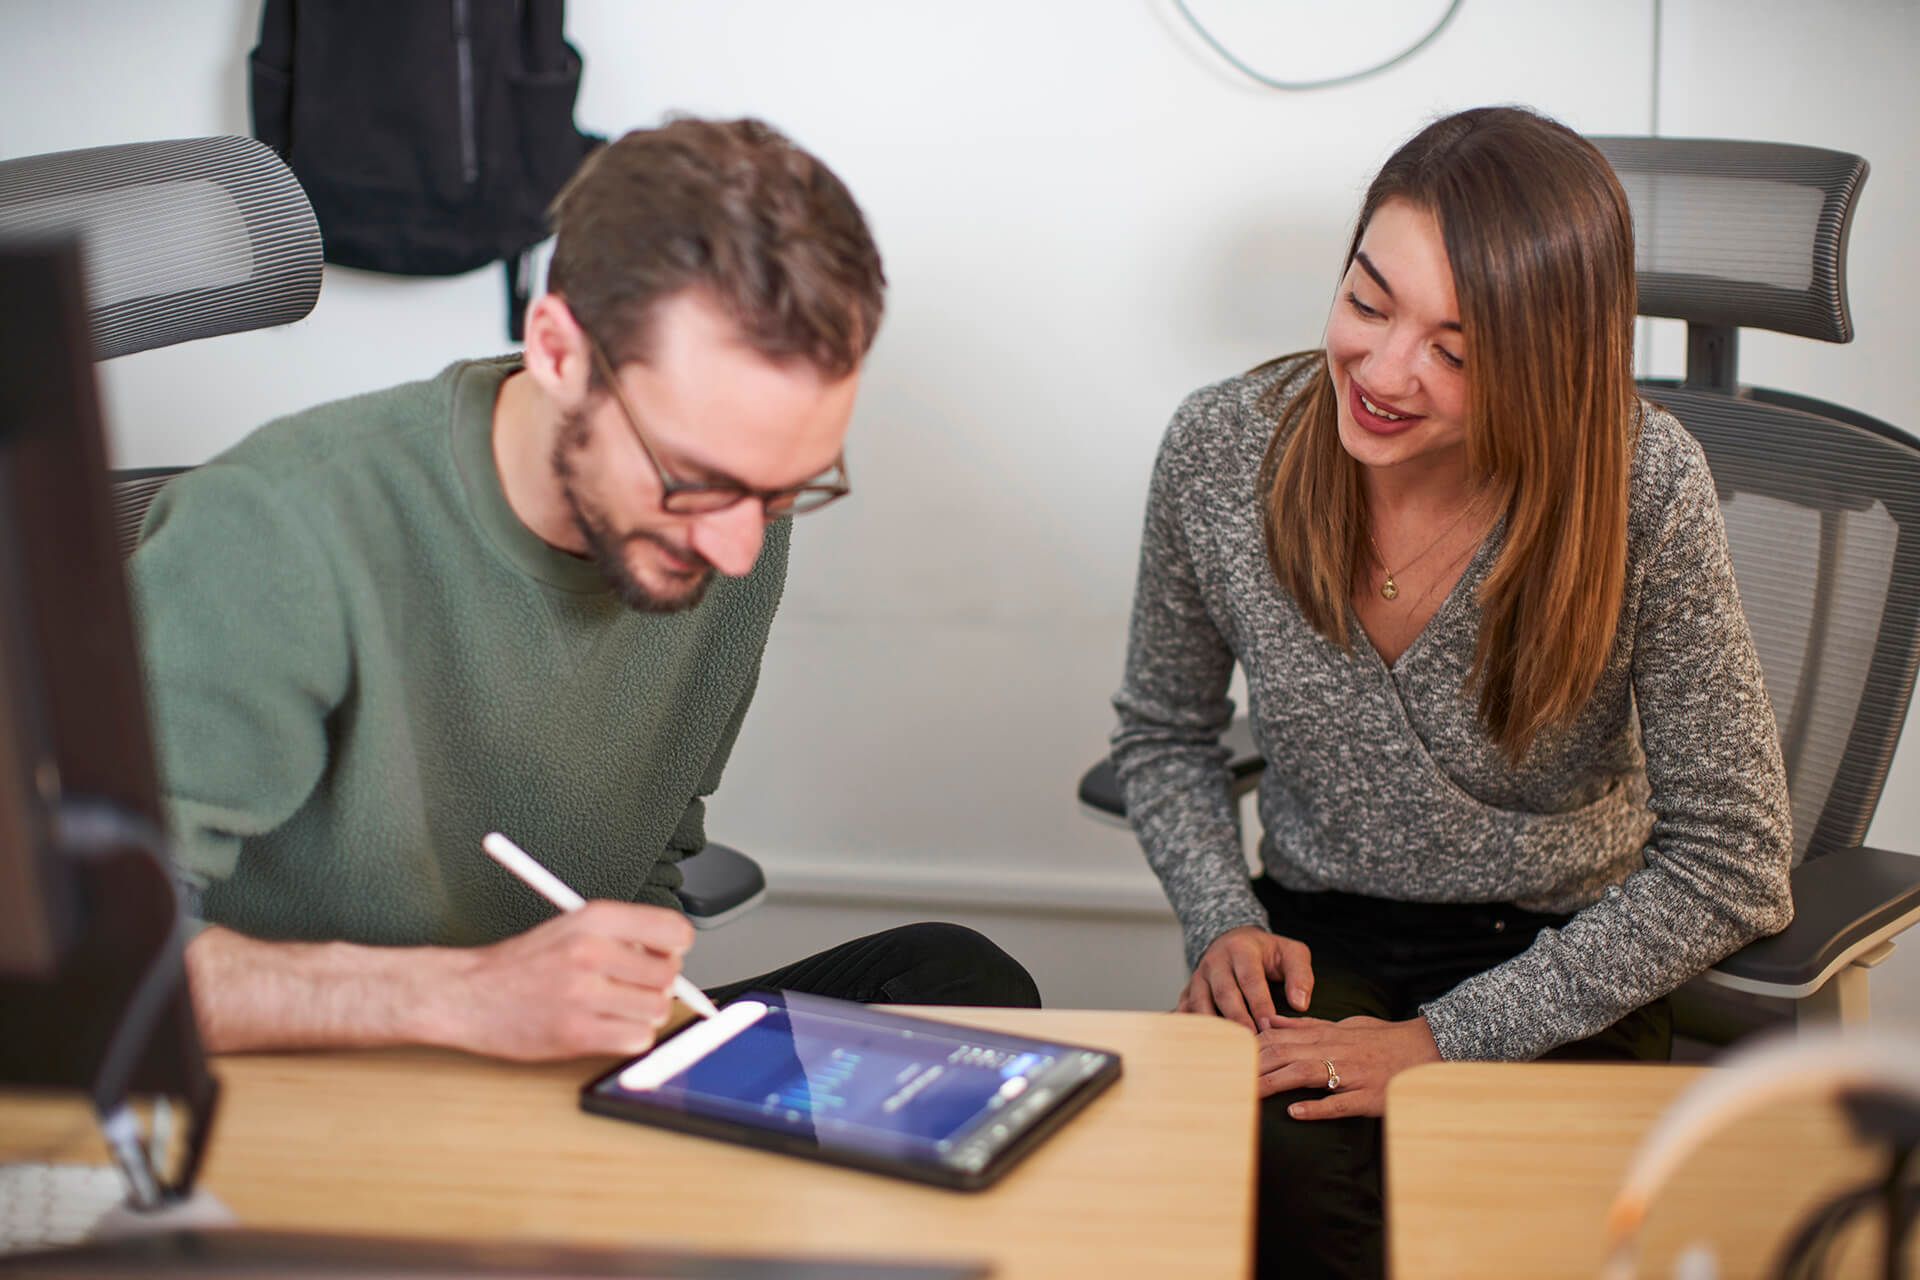 Hologram Senior Product Designer Sean Nelson and Sales Manager Allison Blade collaborate over an iPad in the Hologram office.